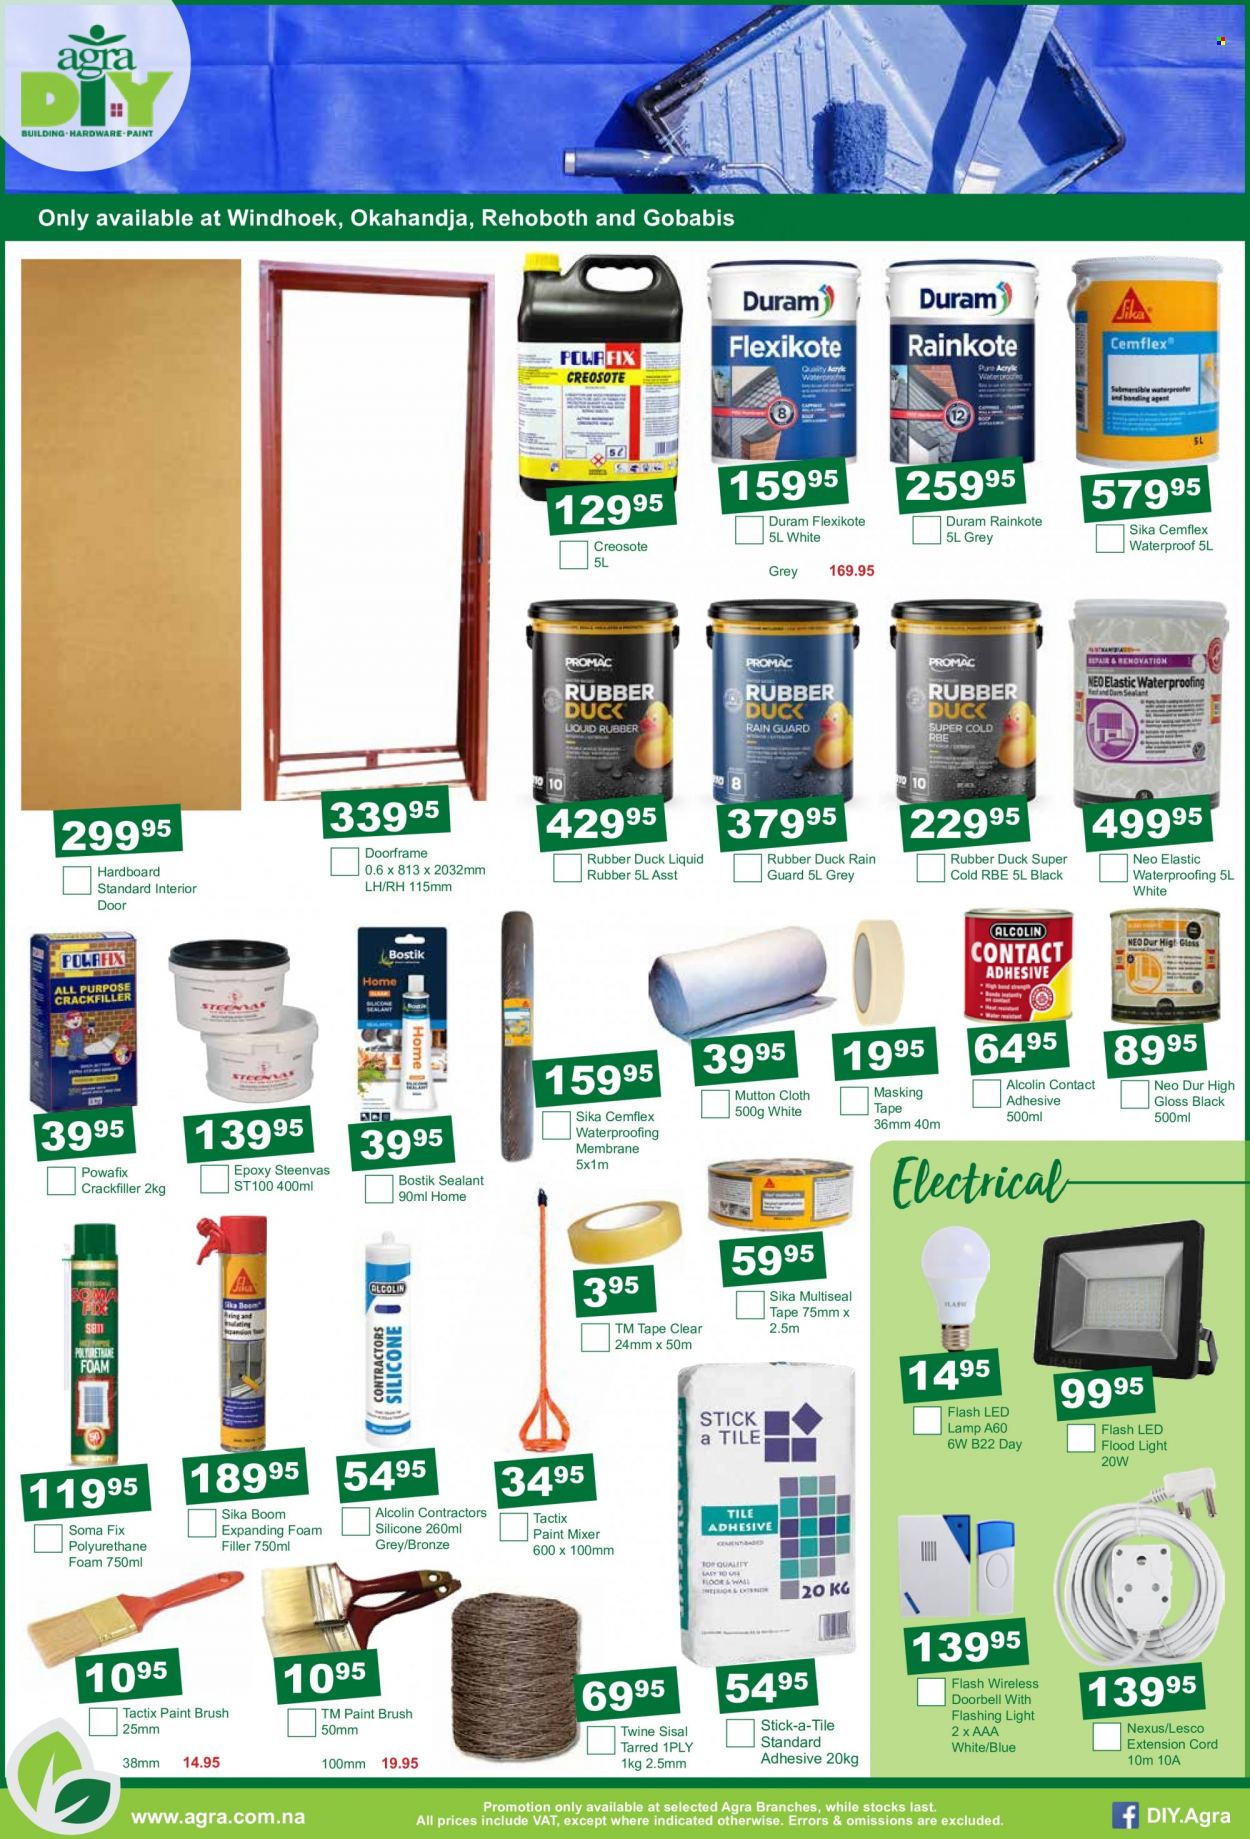 thumbnail - Agra catalogue  - 19/01/2023 - 20/02/2023 - Sales products - paint brush, eraser, masking tape, paint mixer, Duram, lamp, floodlight, extension cord. Page 3.